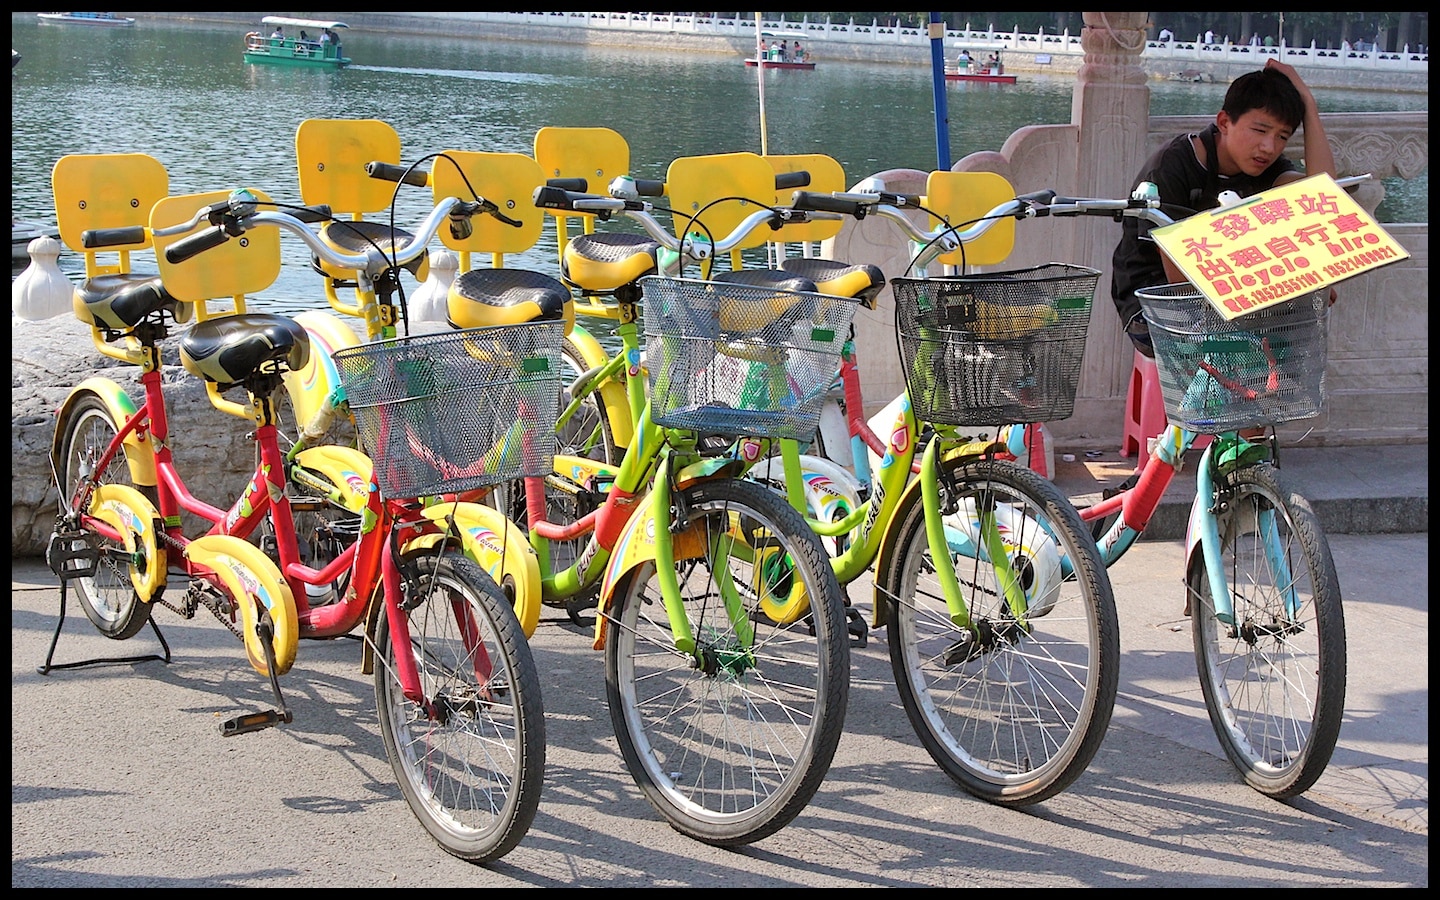 Bicycles for hire in Beijing